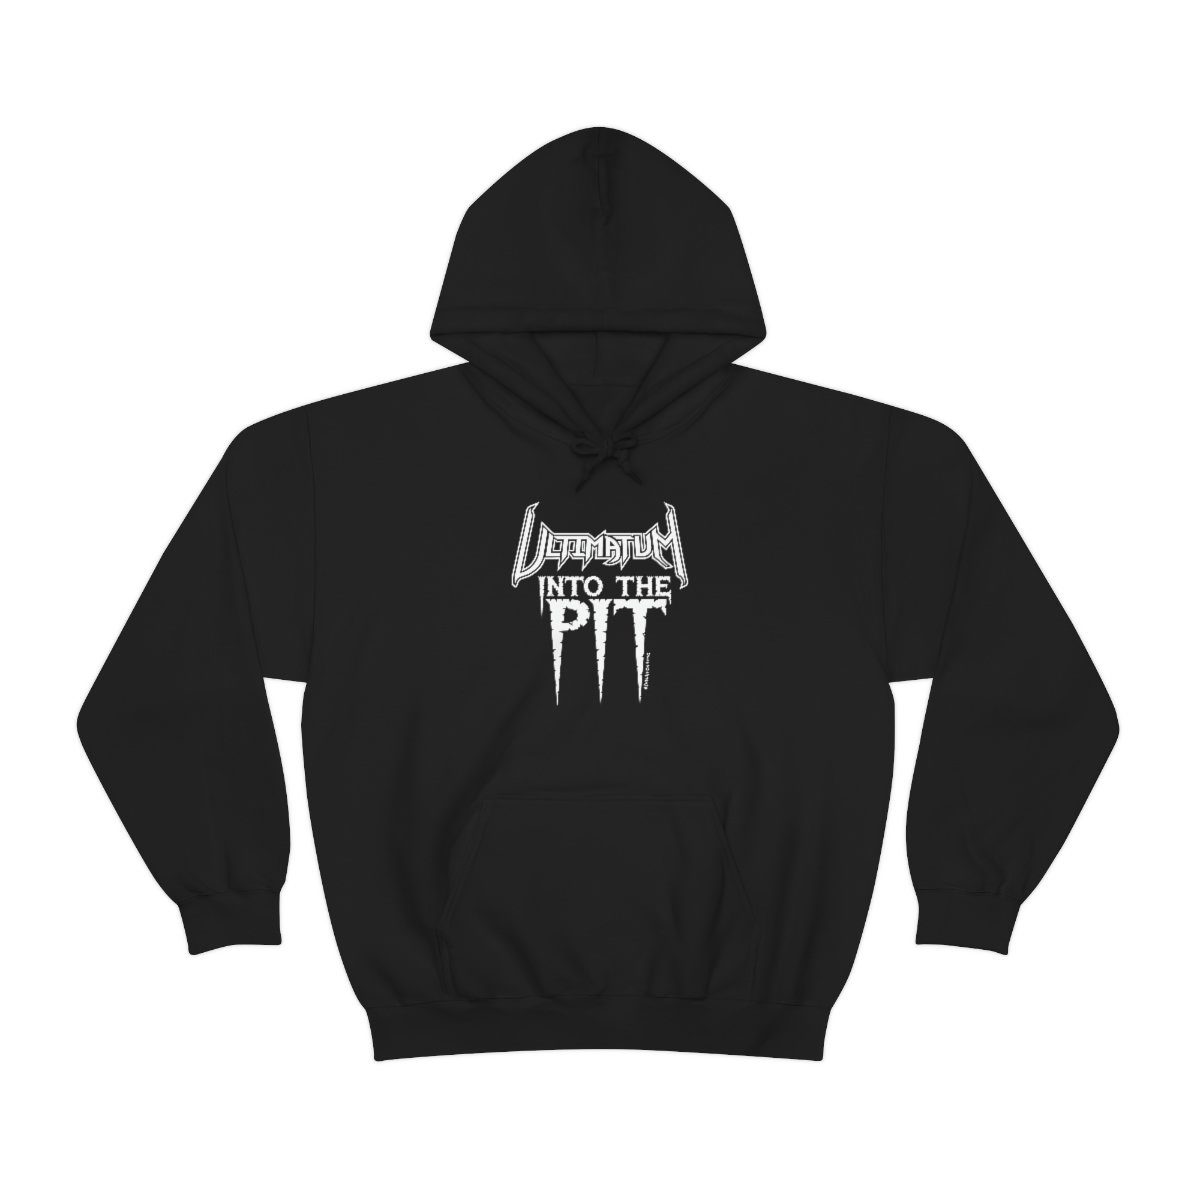 Ultimatum – Into the Pit Pullover Hooded Sweatshirt